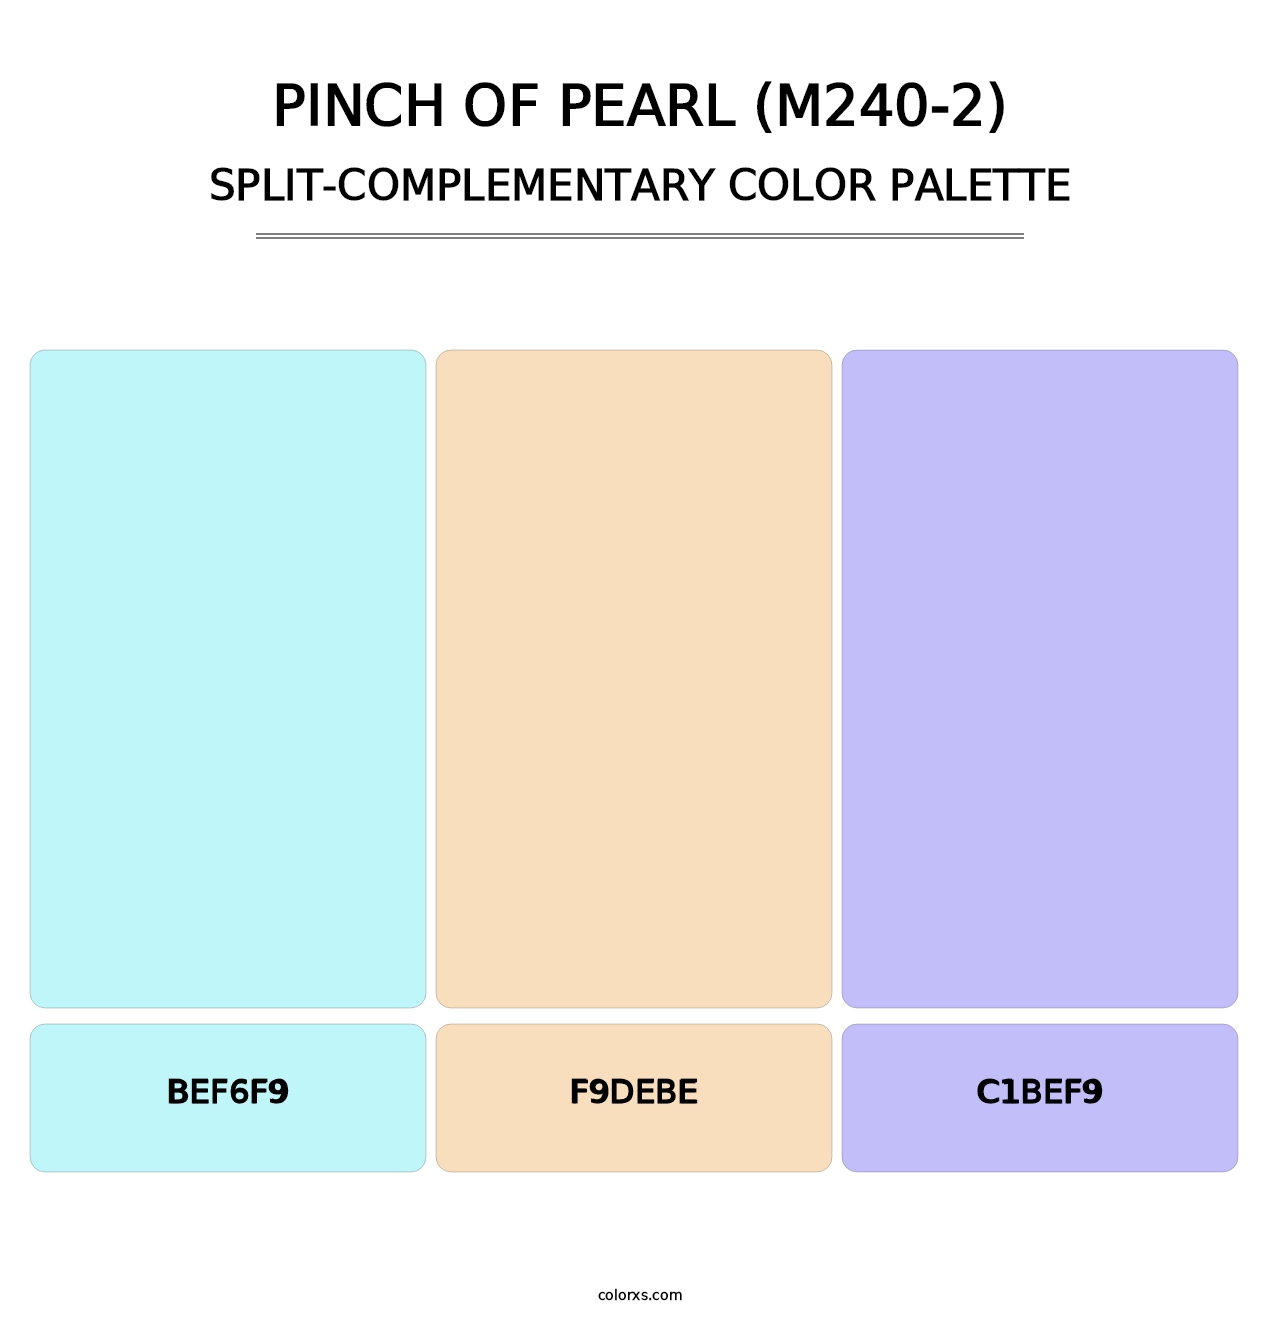 Pinch Of Pearl (M240-2) - Split-Complementary Color Palette